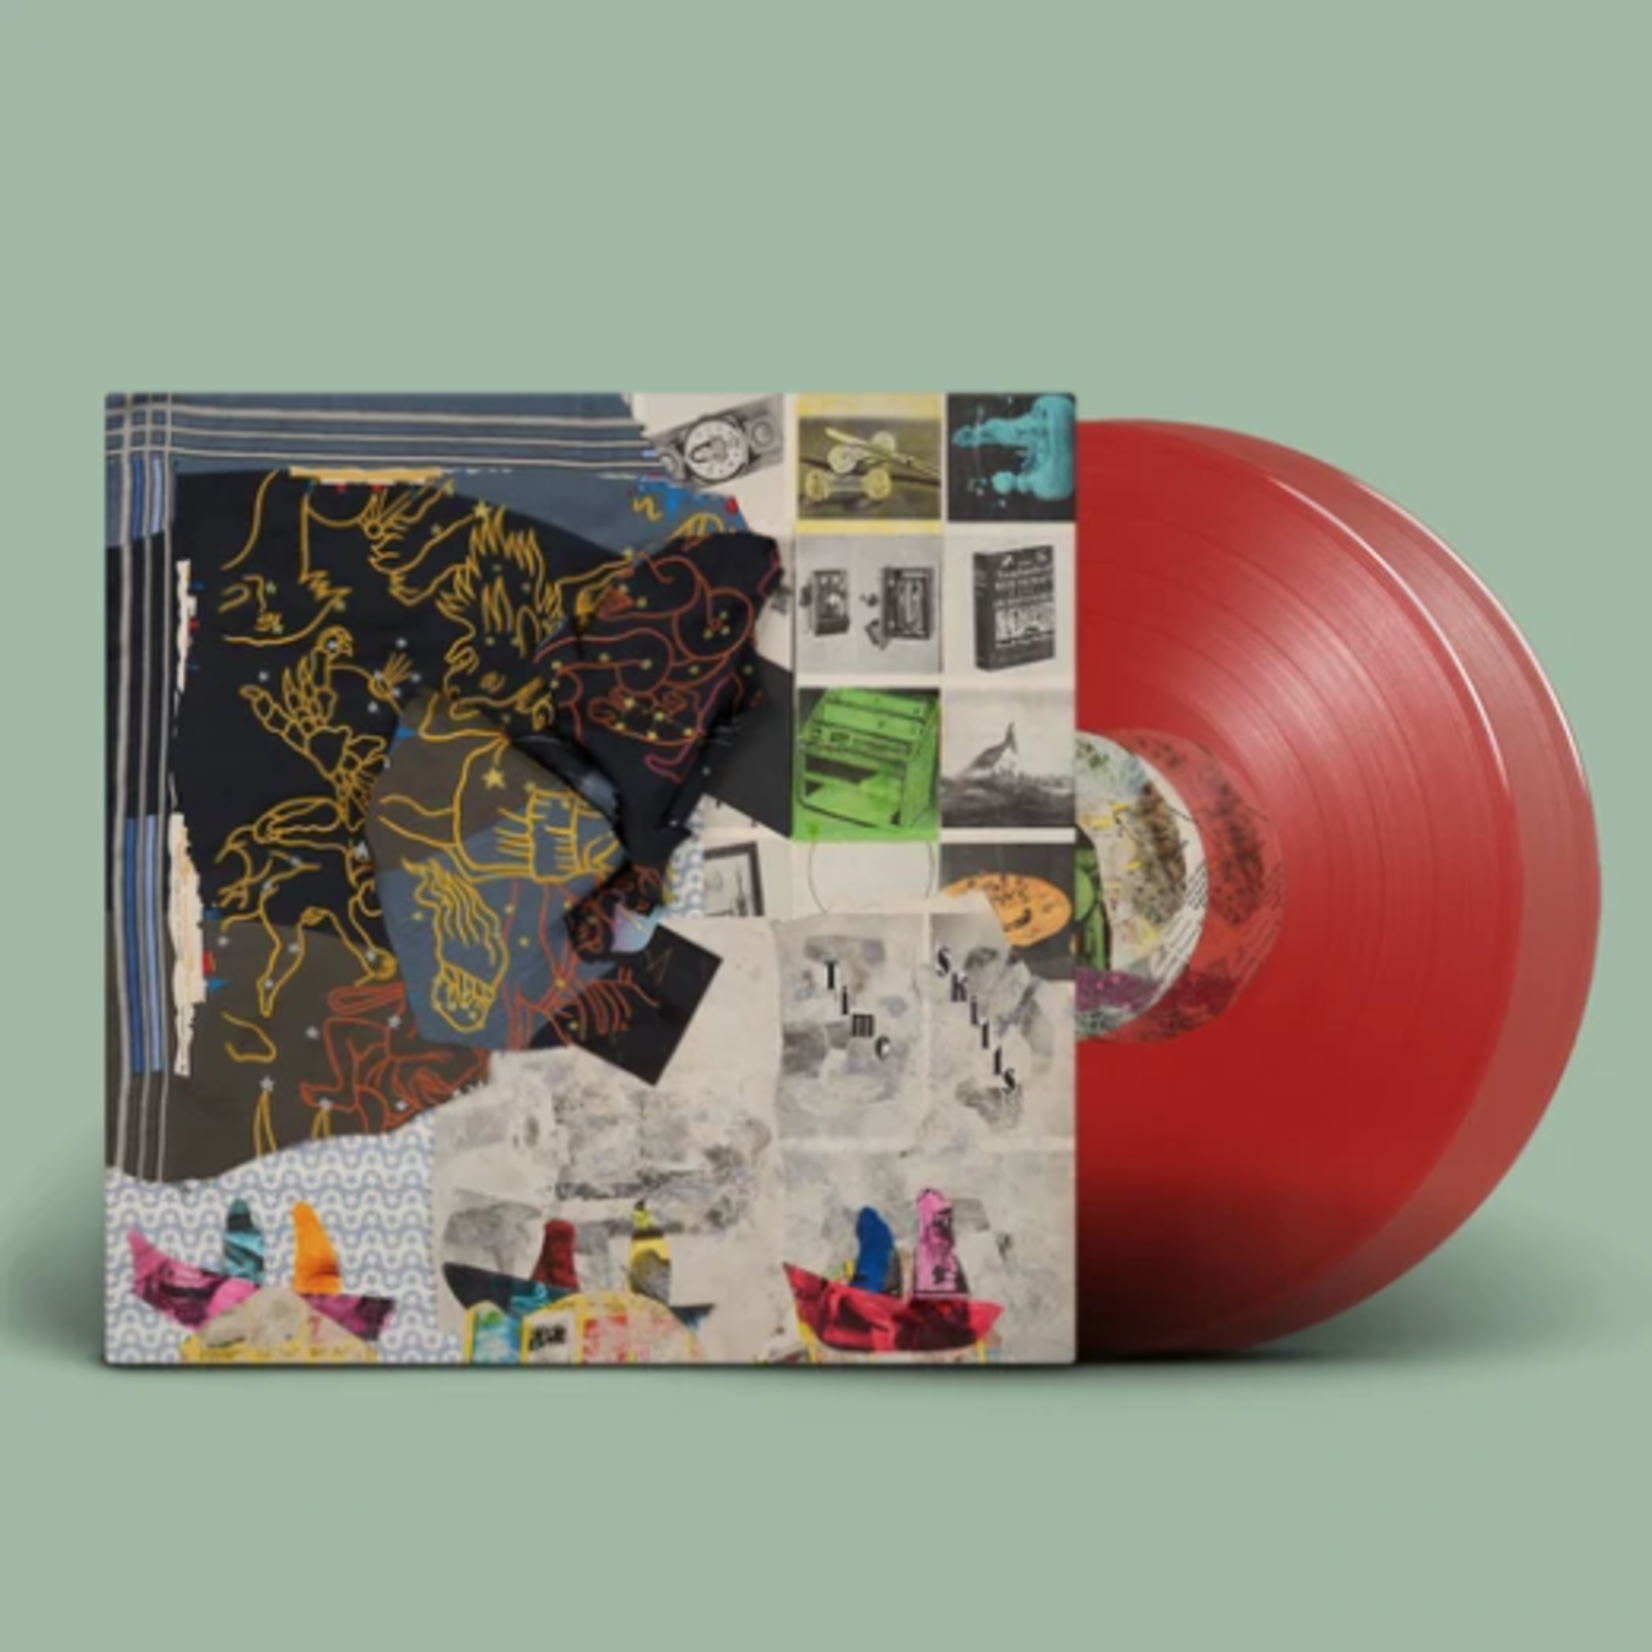 Domino Animal Collective - Time Skiffs (2LP) [Ruby]